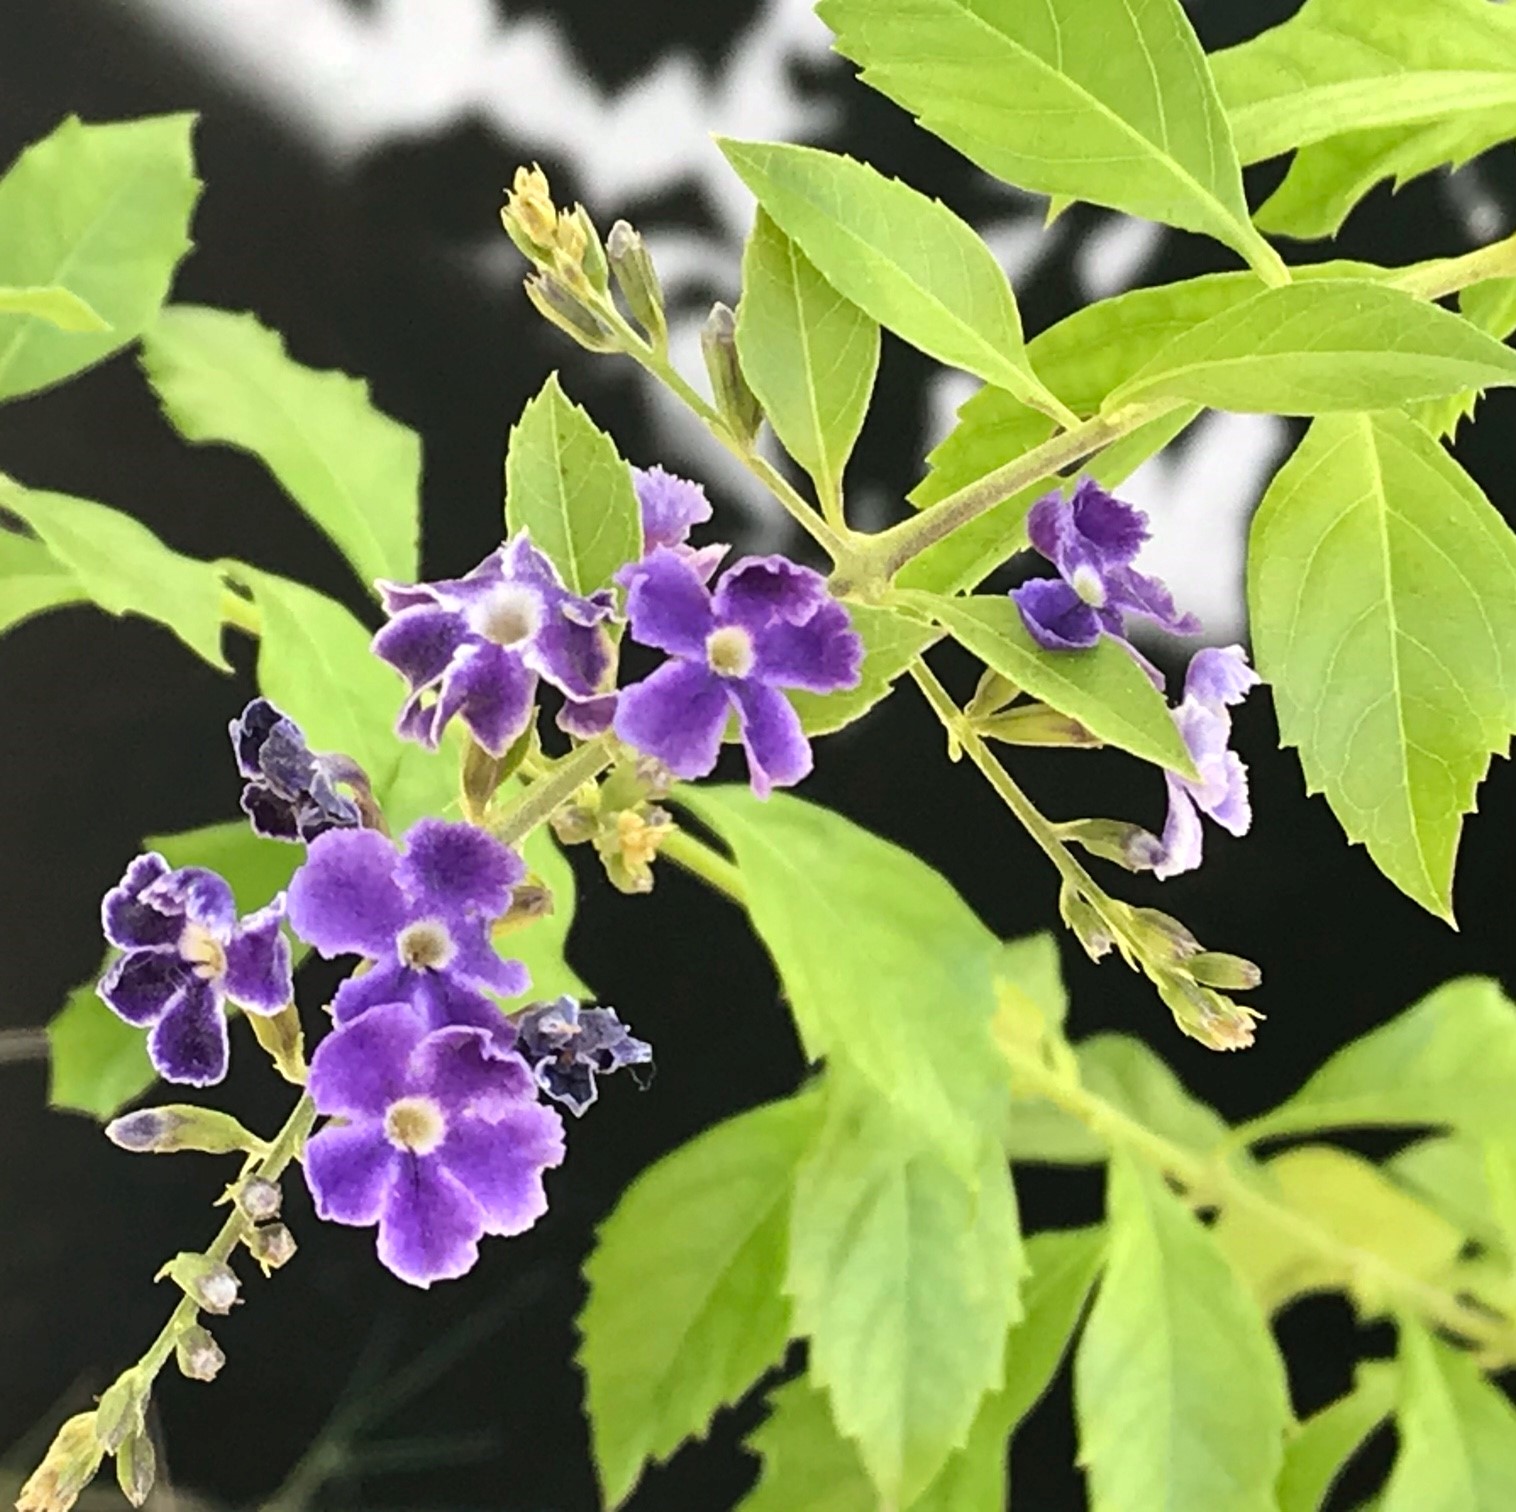 Skyflower (Duranta erecta), a tropical plant adapted to Central Texas, blooms from summer to first frost.